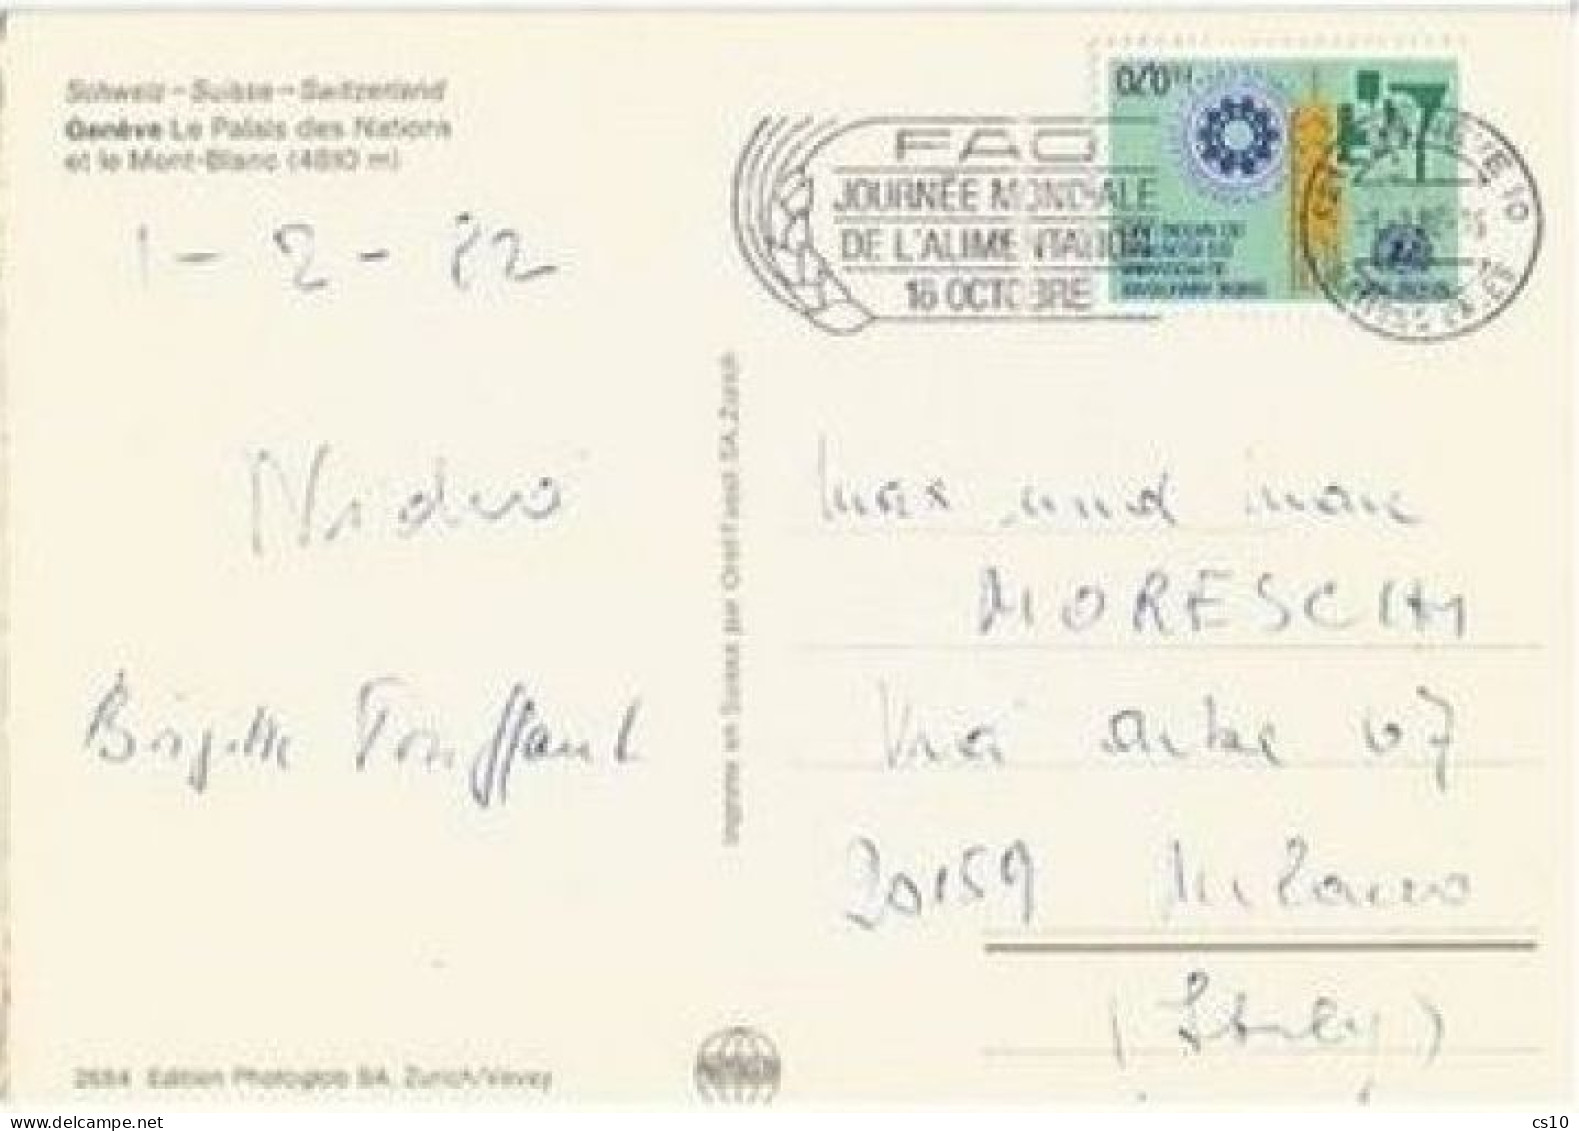 Suisse United Nations Volunterers Program FS0.70 Solo Franking Pcard Geneve 1feb1982 To Italy - Briefe U. Dokumente